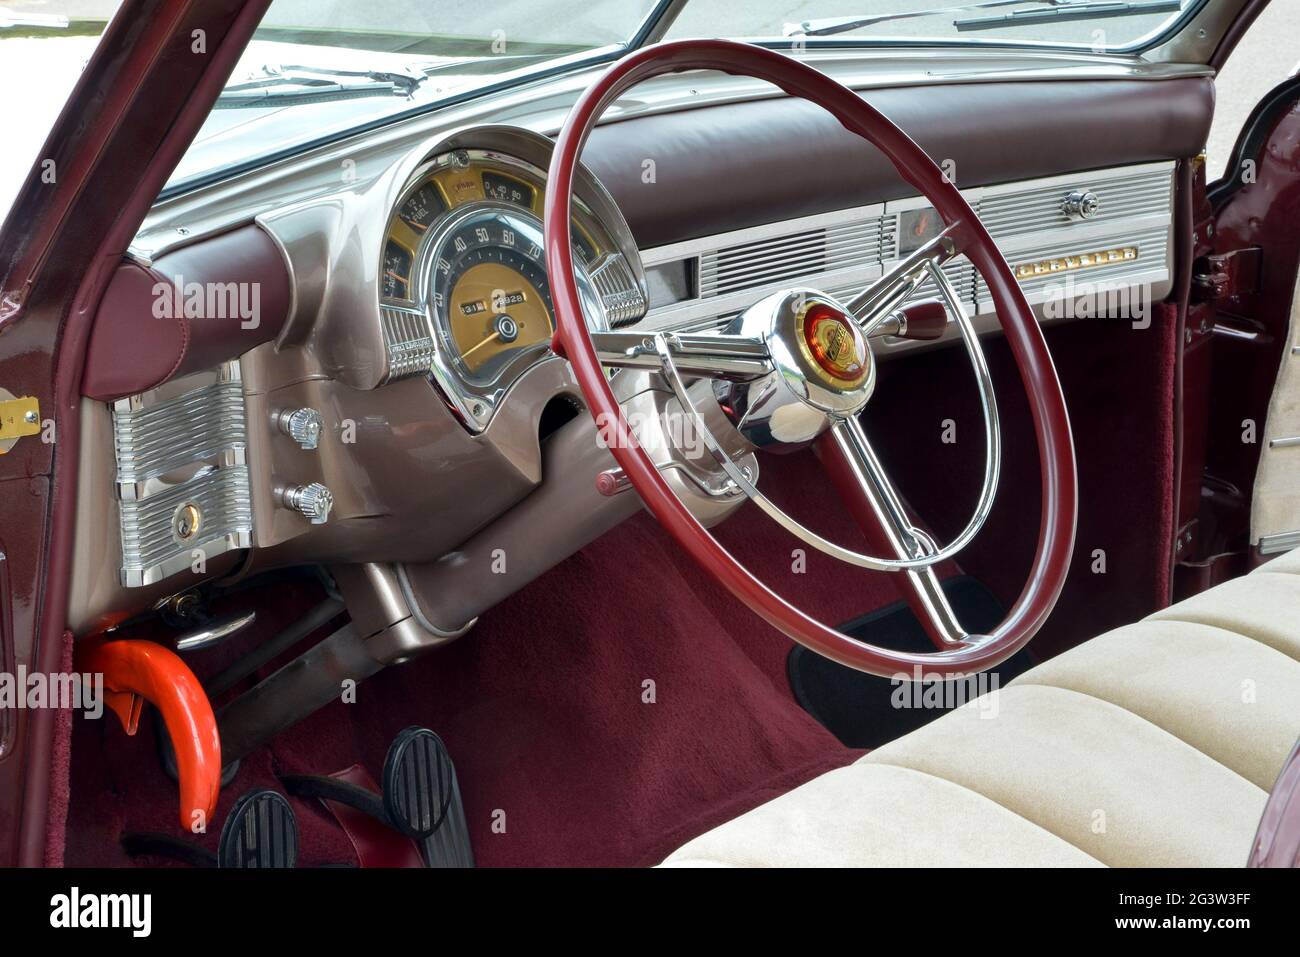 Plenty of chrome and a large gauge cluster mark the 1949 Chrysler dashboard. Stock Photo